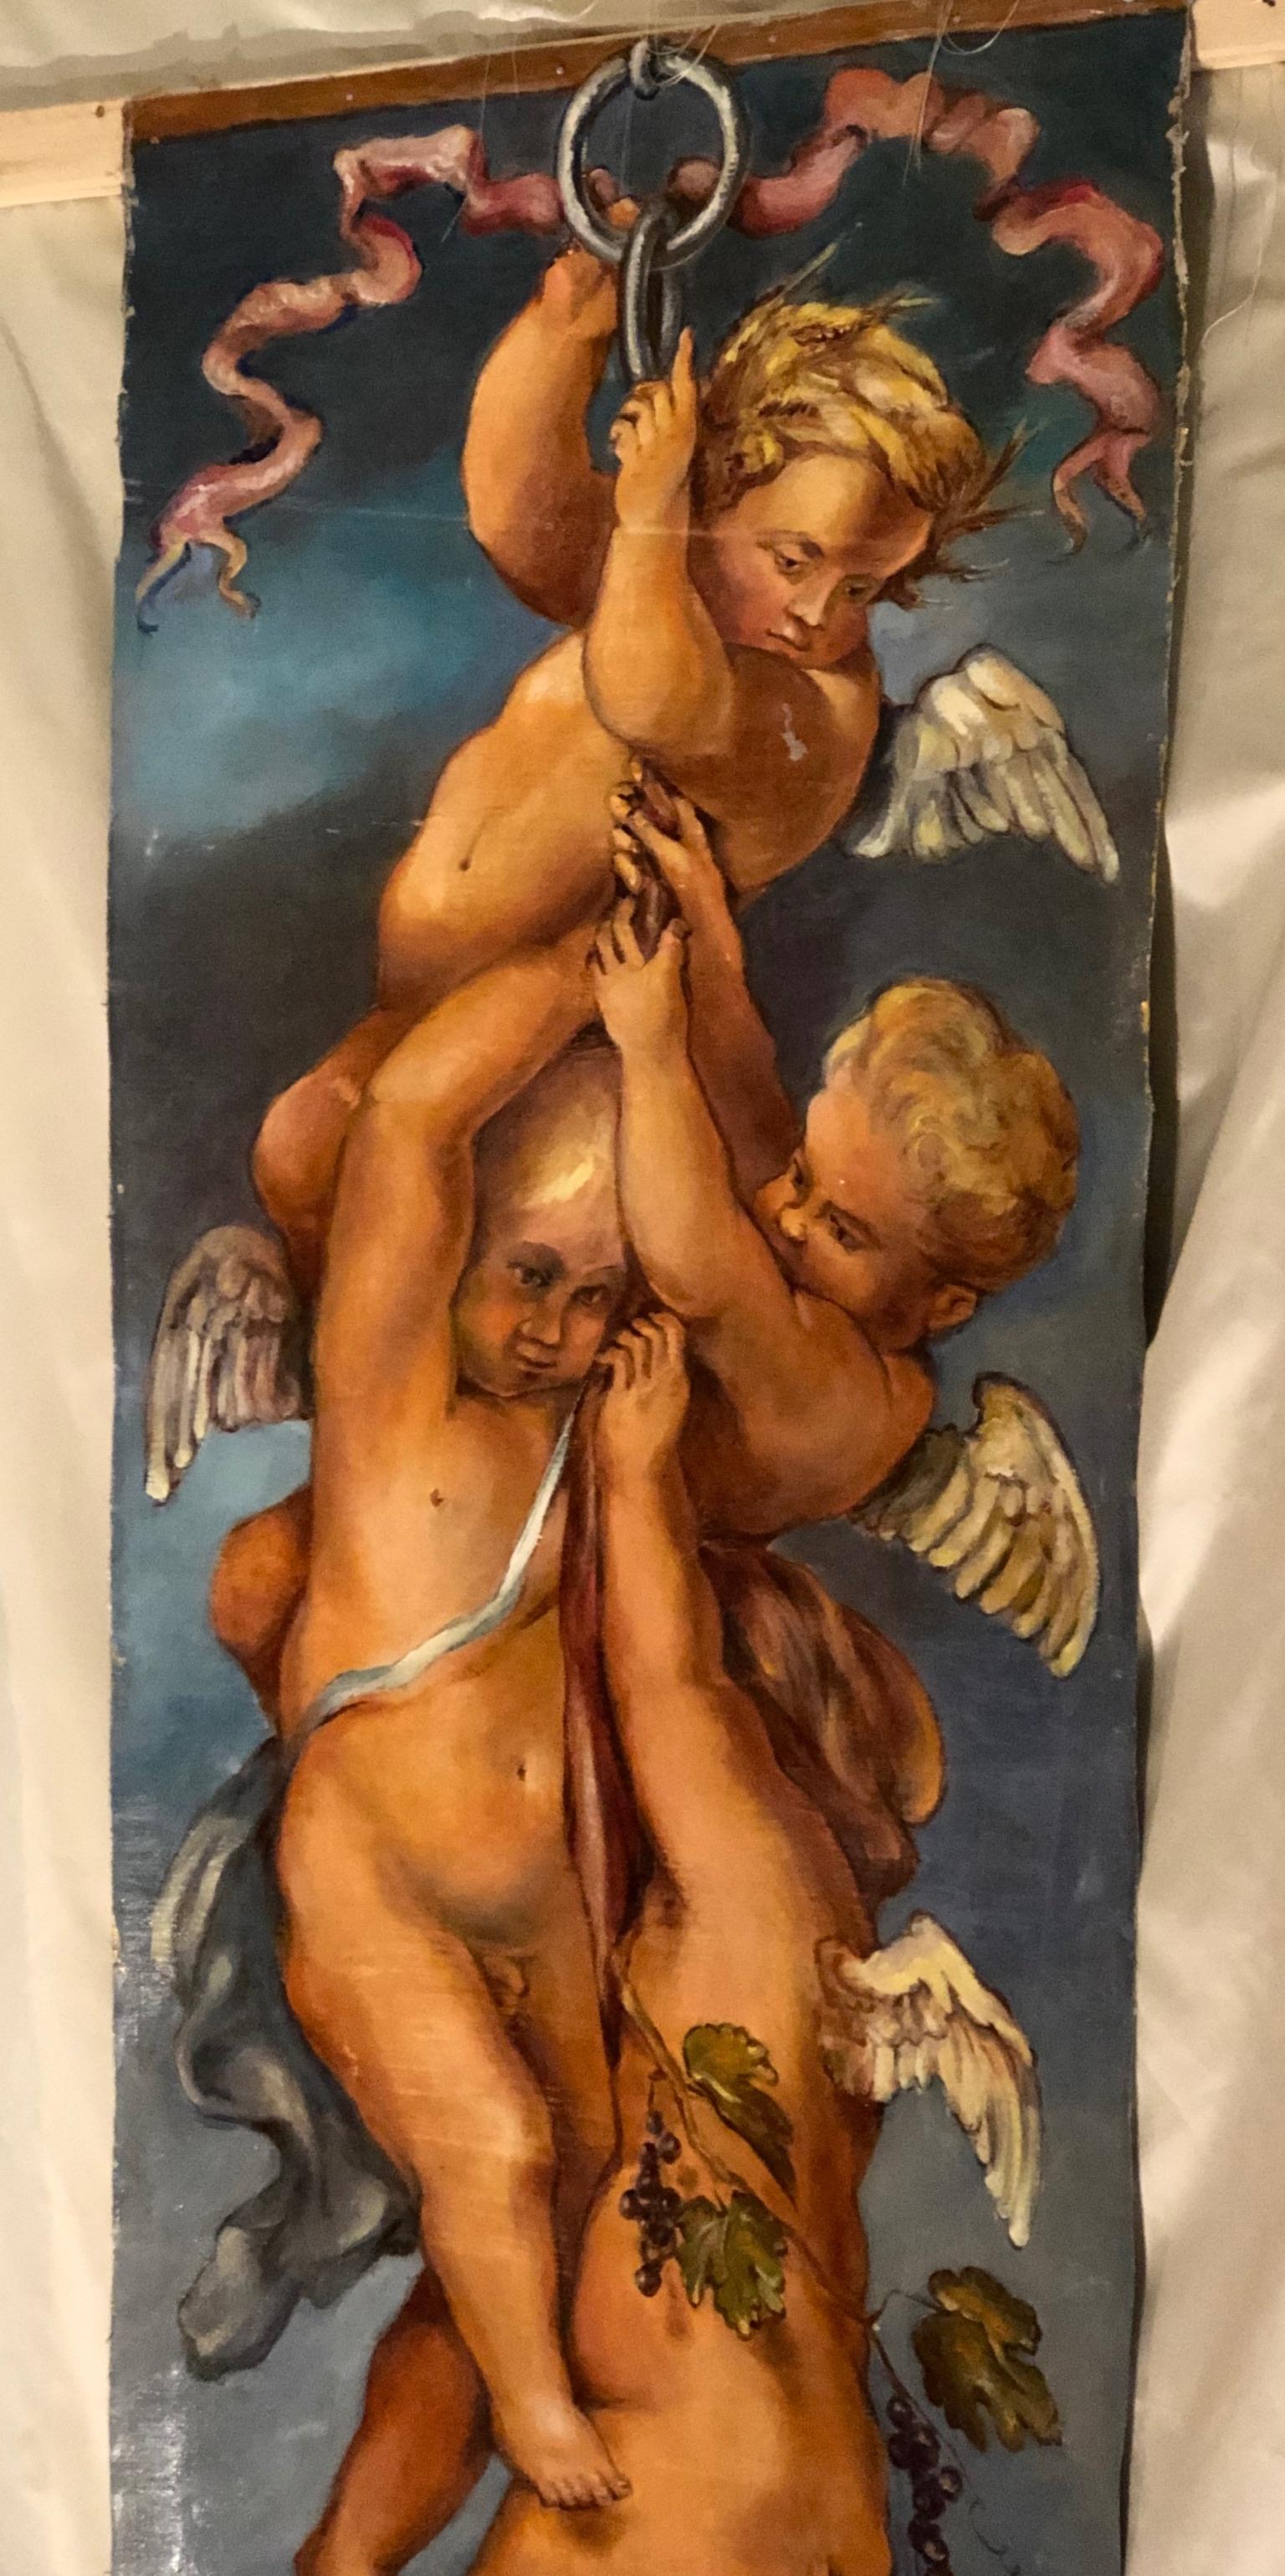 Here is an exquisite, Chute des Anges (Falling/Clinbing Angels) painted in oil on canvas which was created to be installed in a 19th century Palace in des Yvelines, France. I was invited by a friend who is an antique dealer in Paris to go visit this